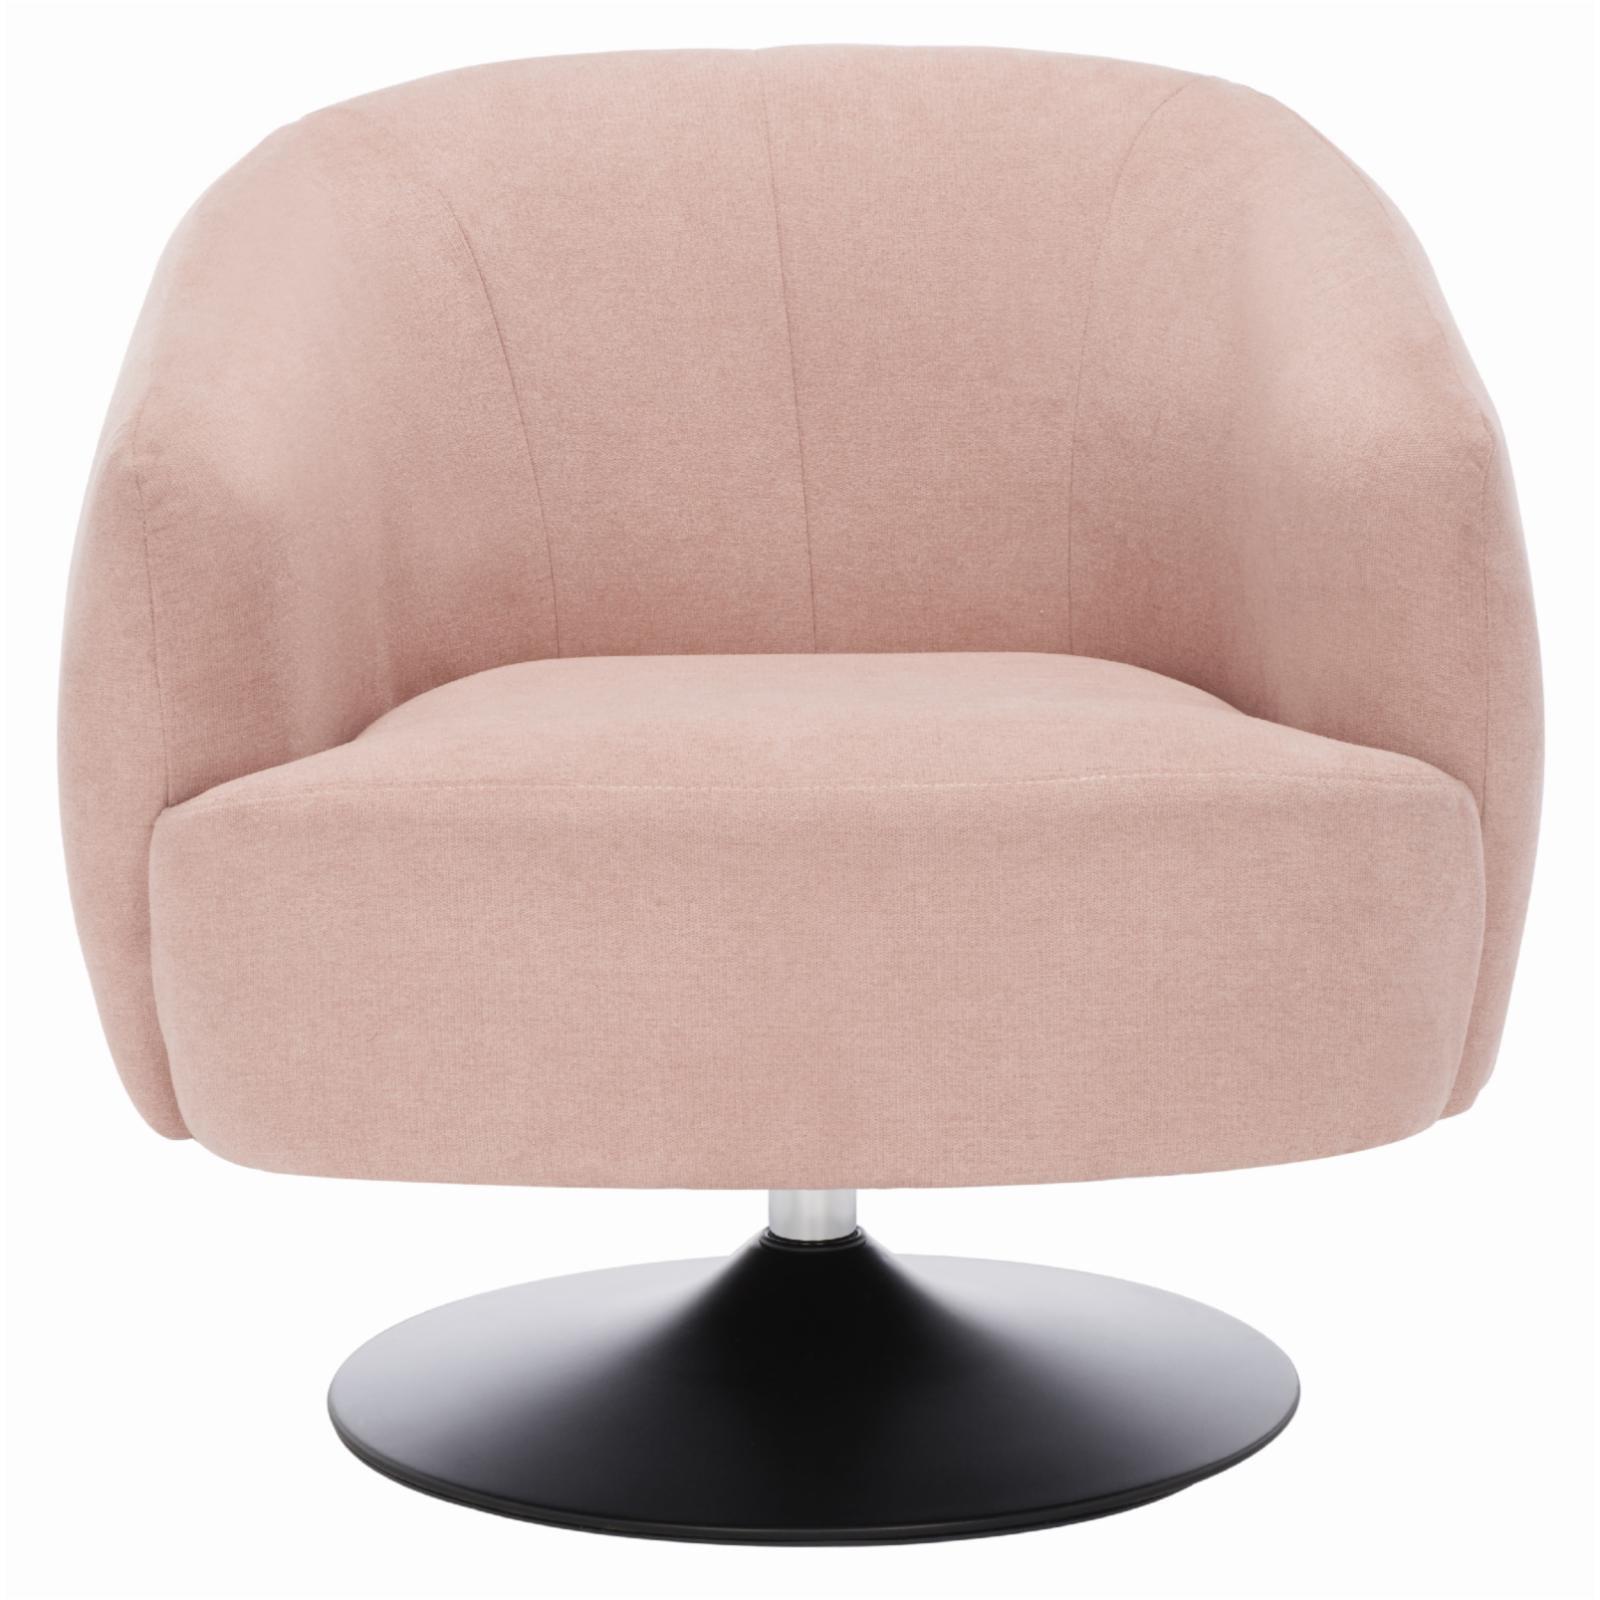 Blush Velvet Swivel Barrel Accent Chair with Wood Detailing